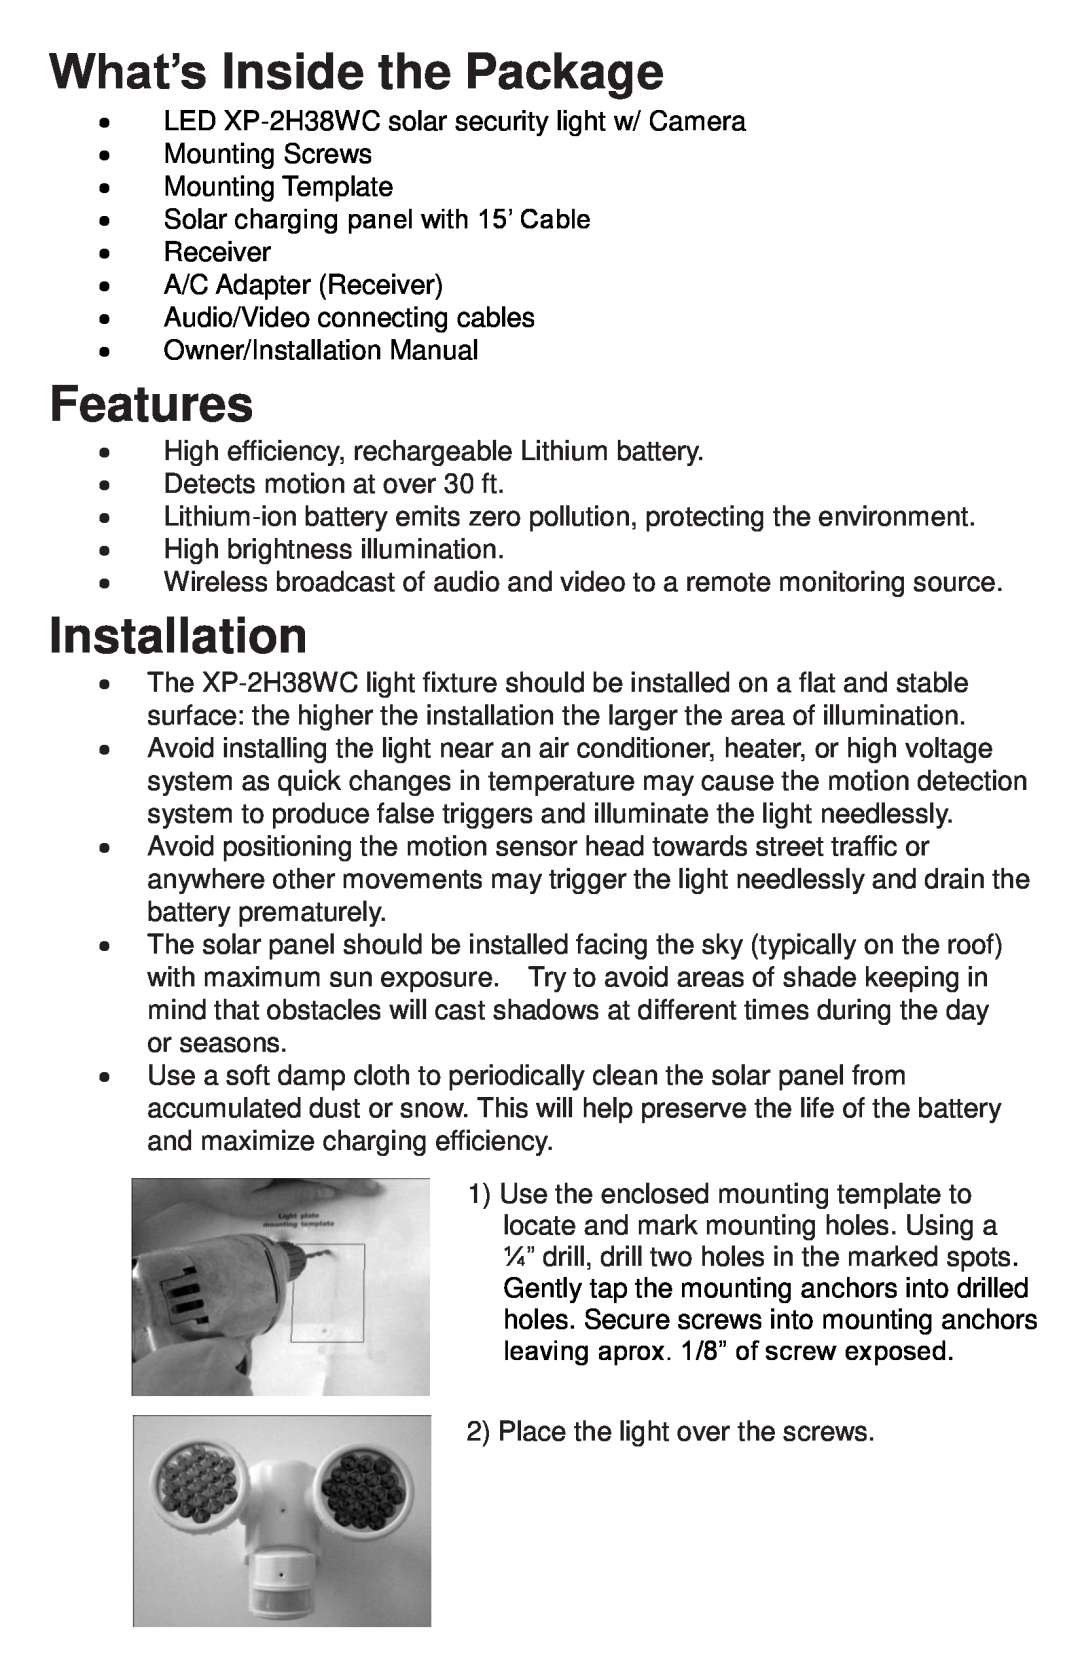 Coleman XP-2H38WC instruction manual What’s Inside the Package, Features, Installation 